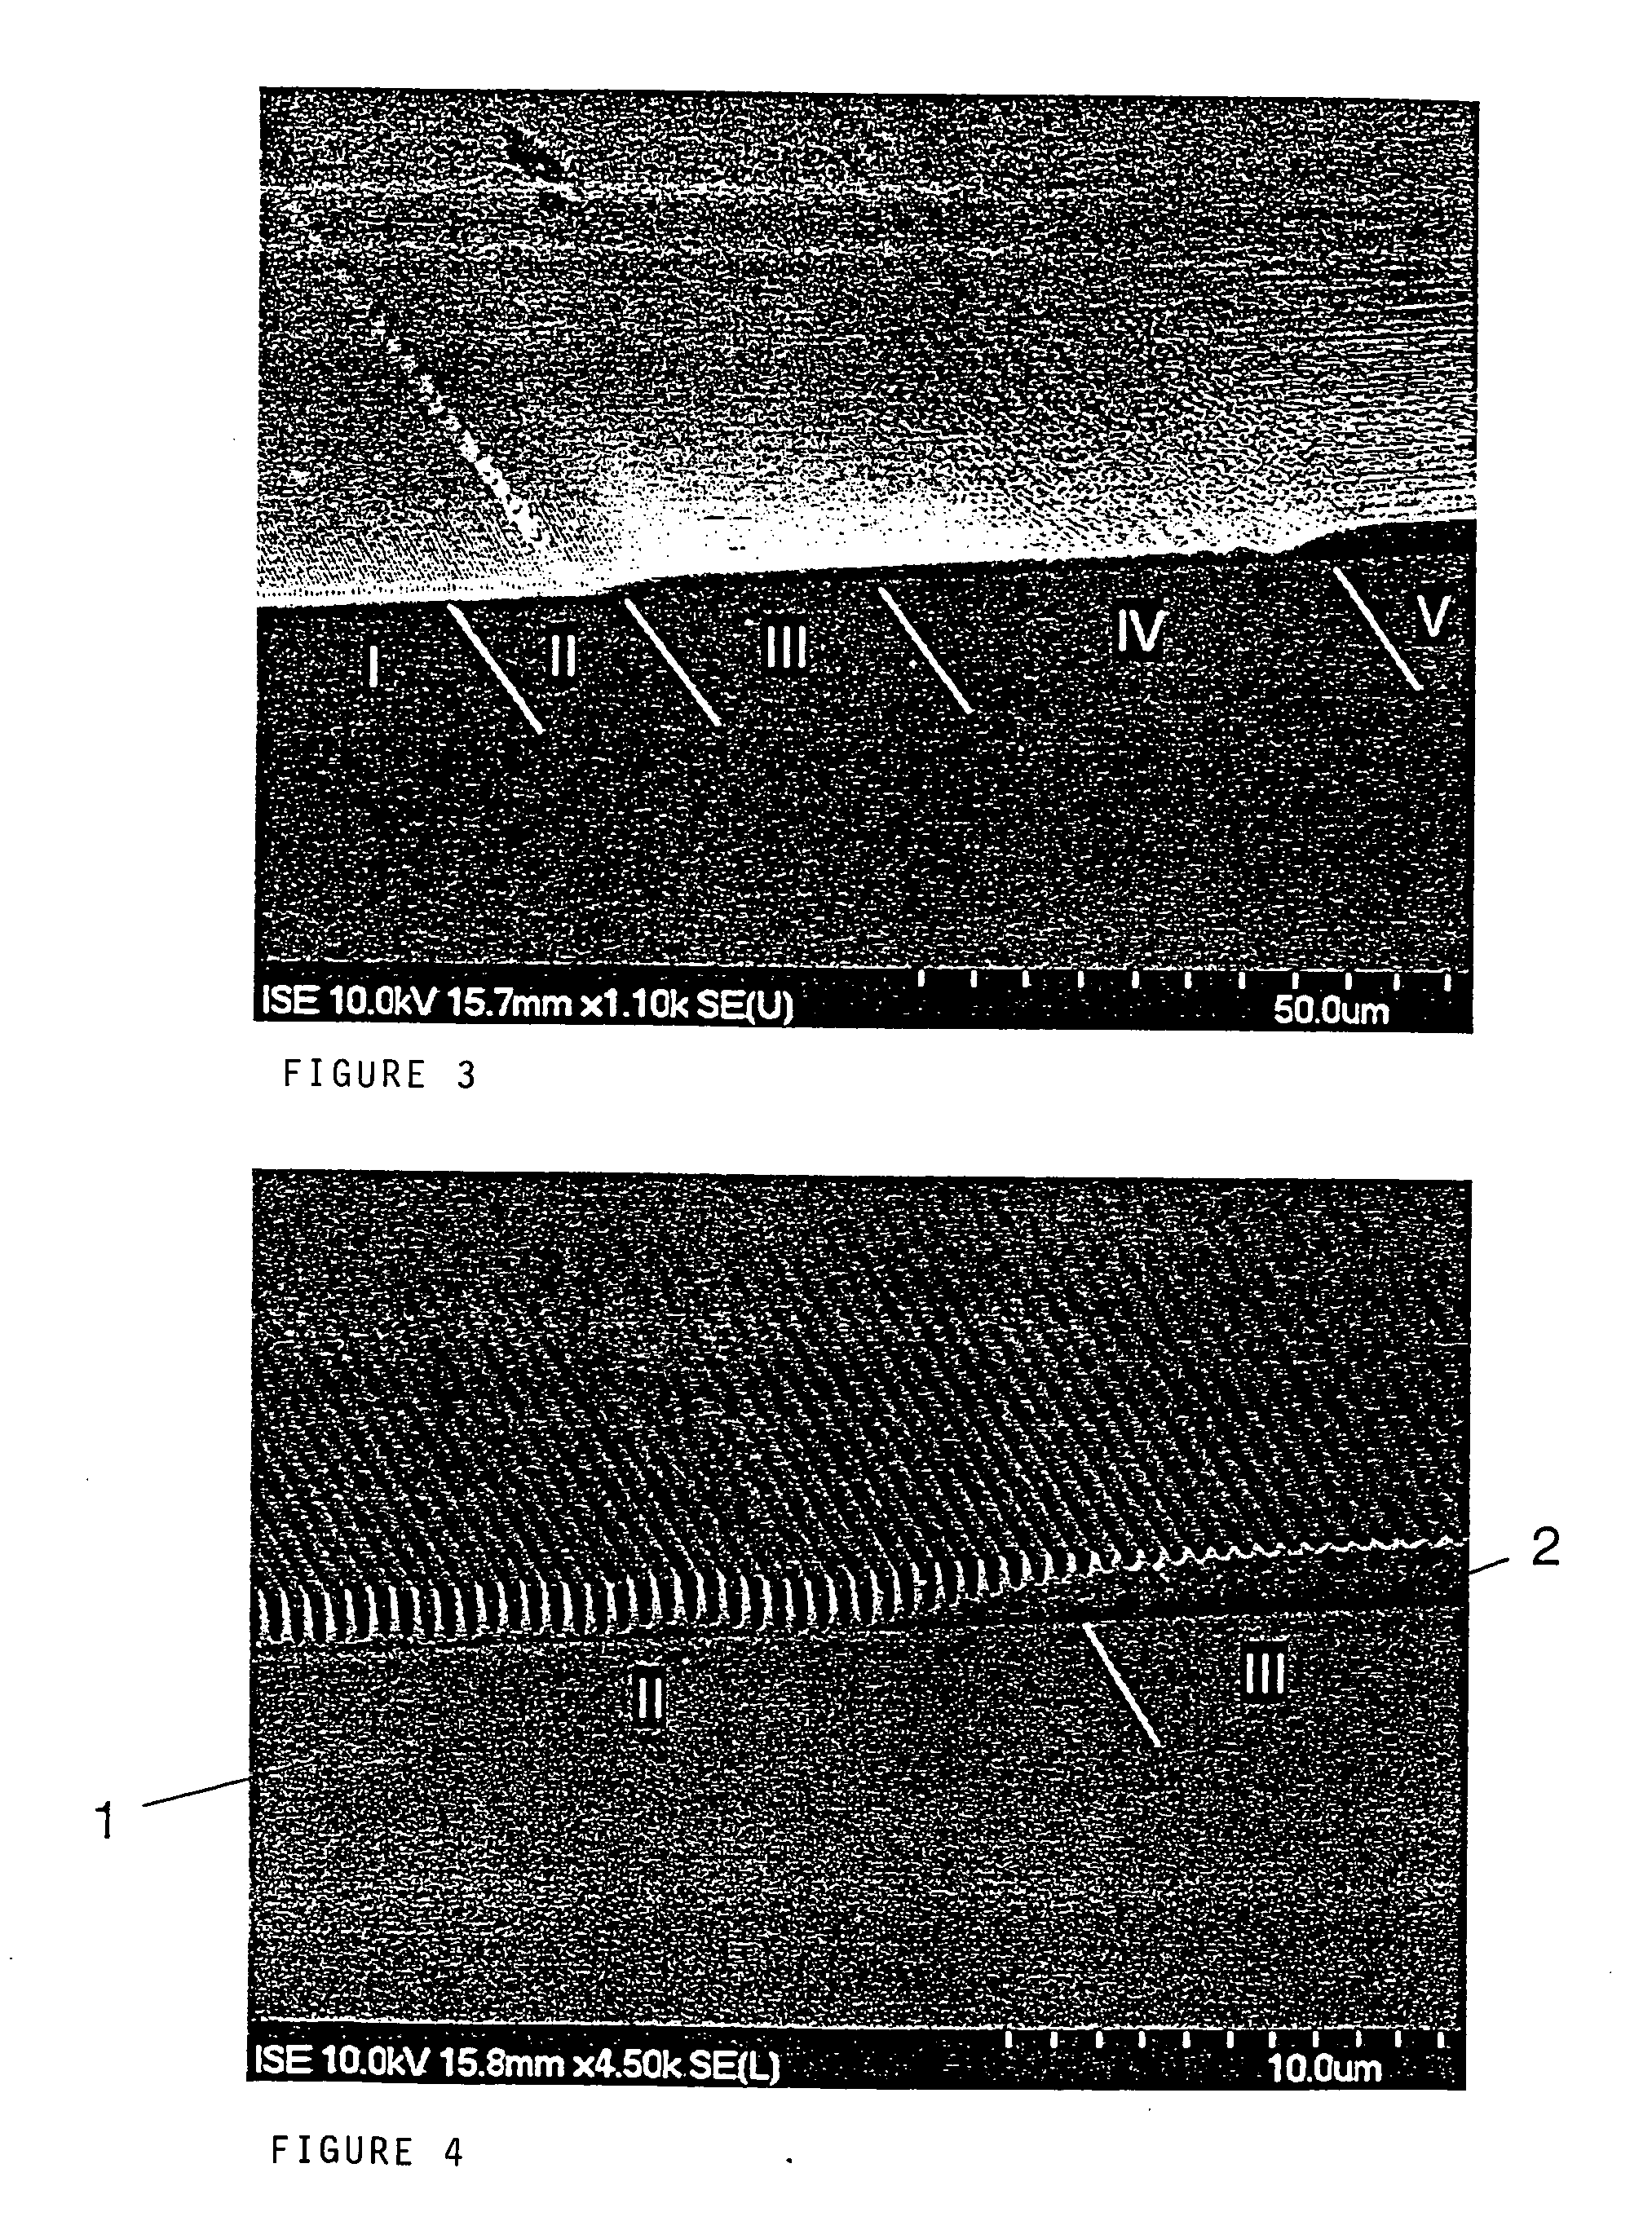 Method and device for producing a coupling grating for a waveguide